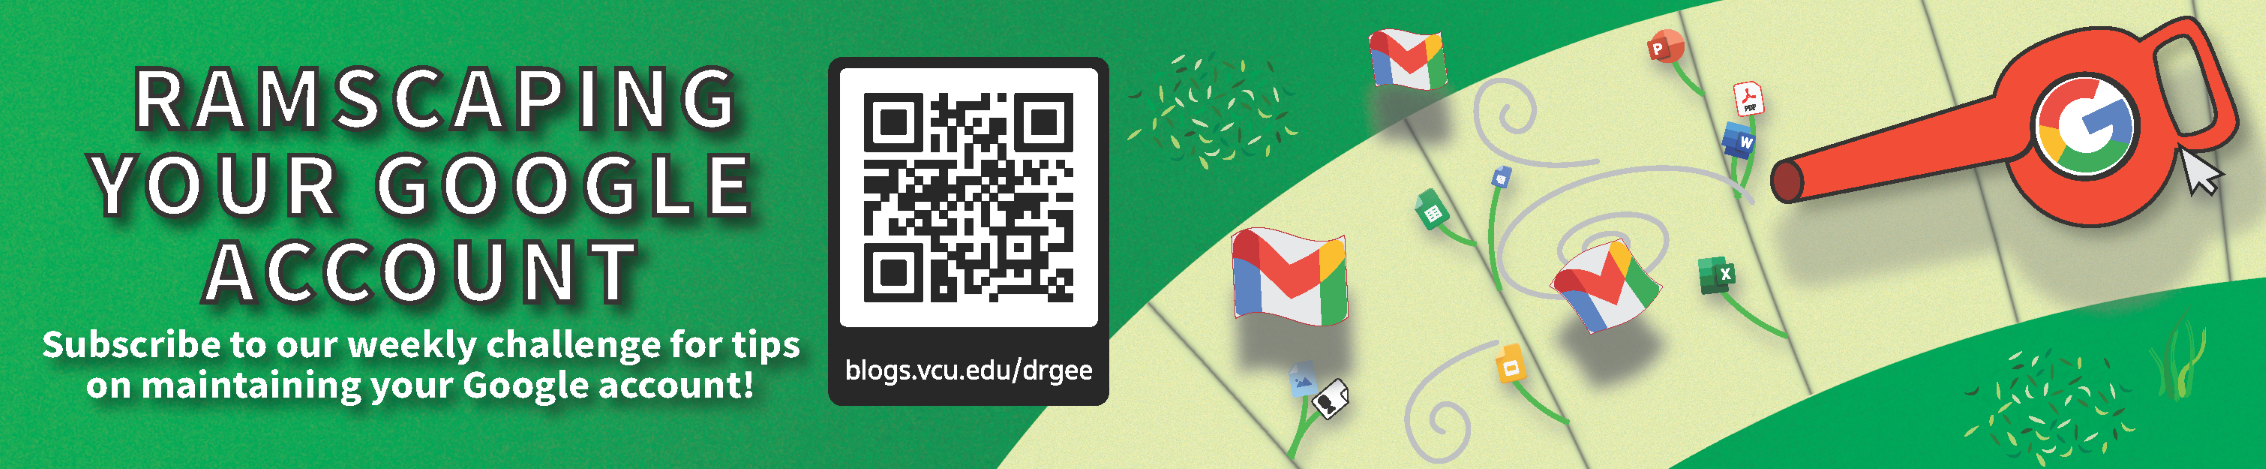 Ramscaping Your Google Account / Subscribe to our weekly challenge for tips on maintaining your Google account! / Visit https://blogs.vcu.edu/drgee